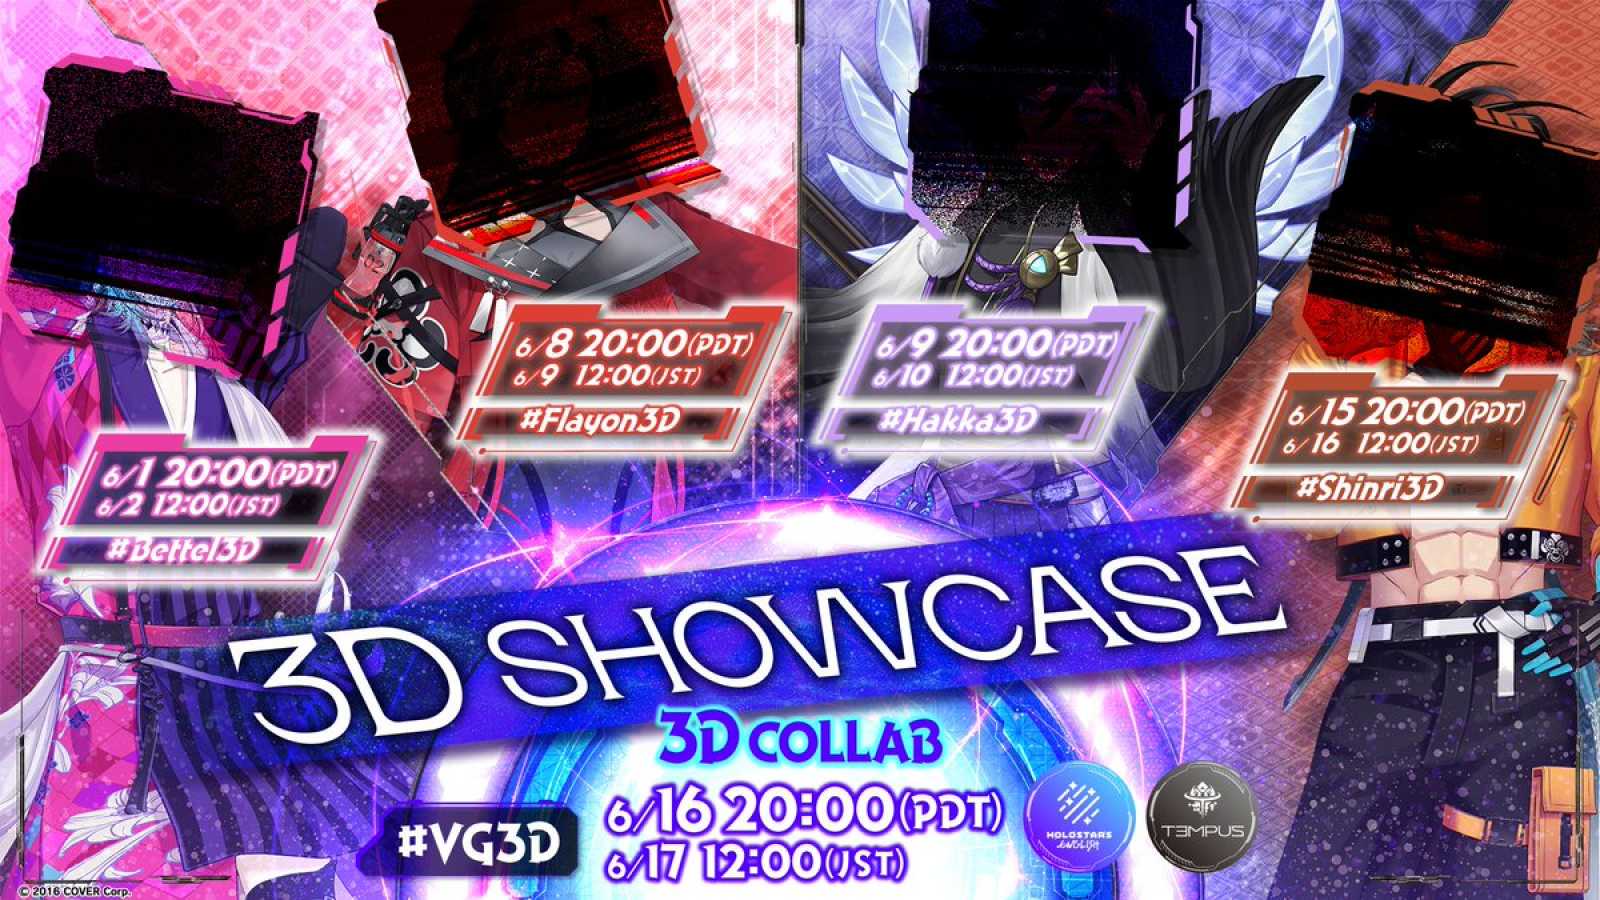 3D Showcases Announced for TEMPUS Vanguard © COVER Corp. All rights reserved.